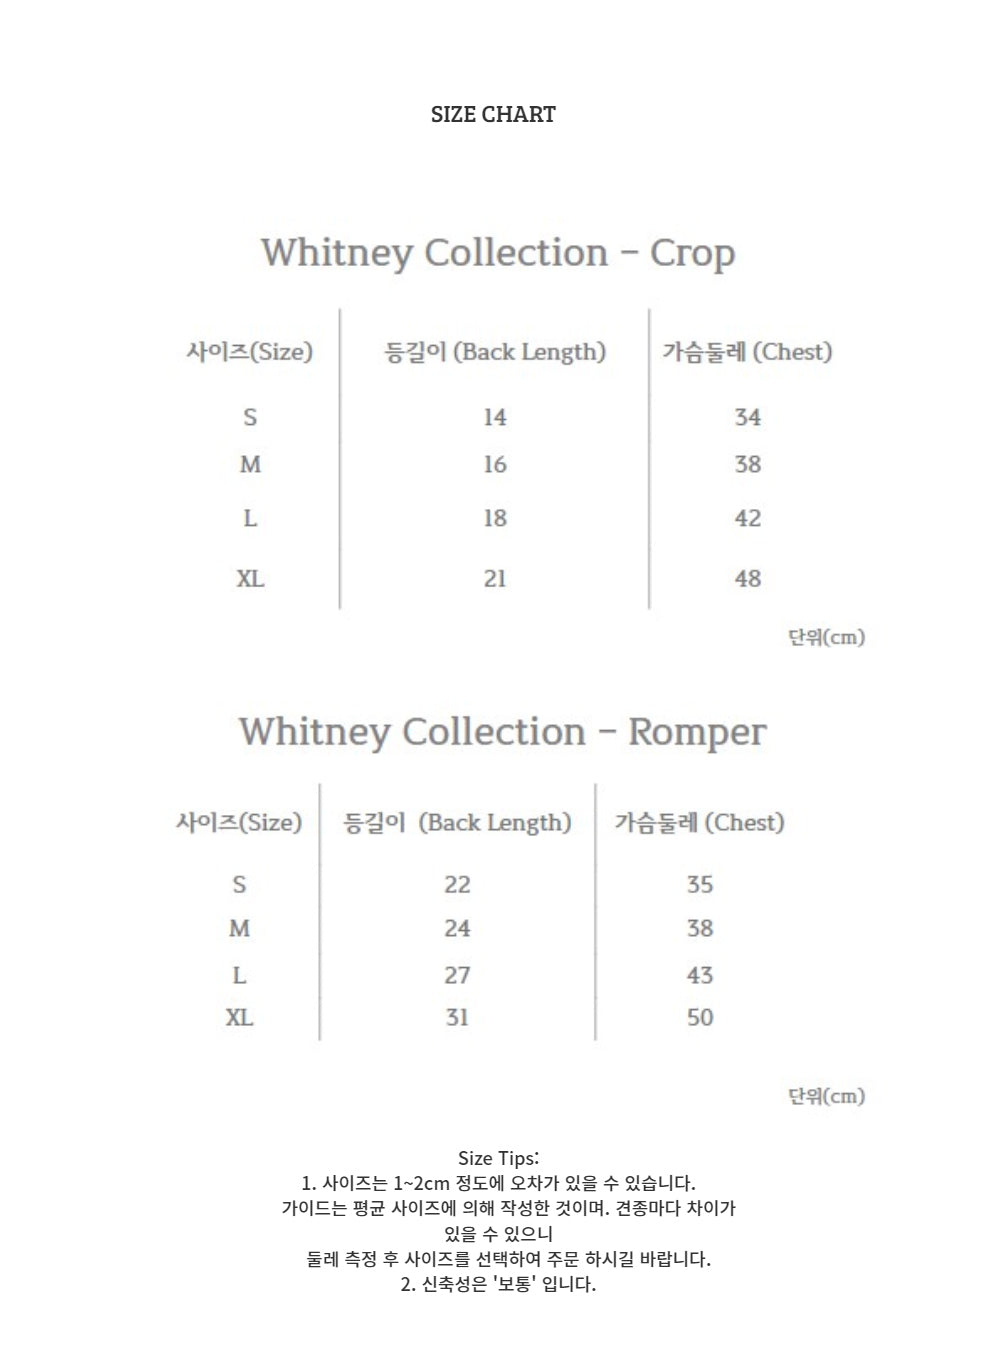 Whitney Collection (2 colors)